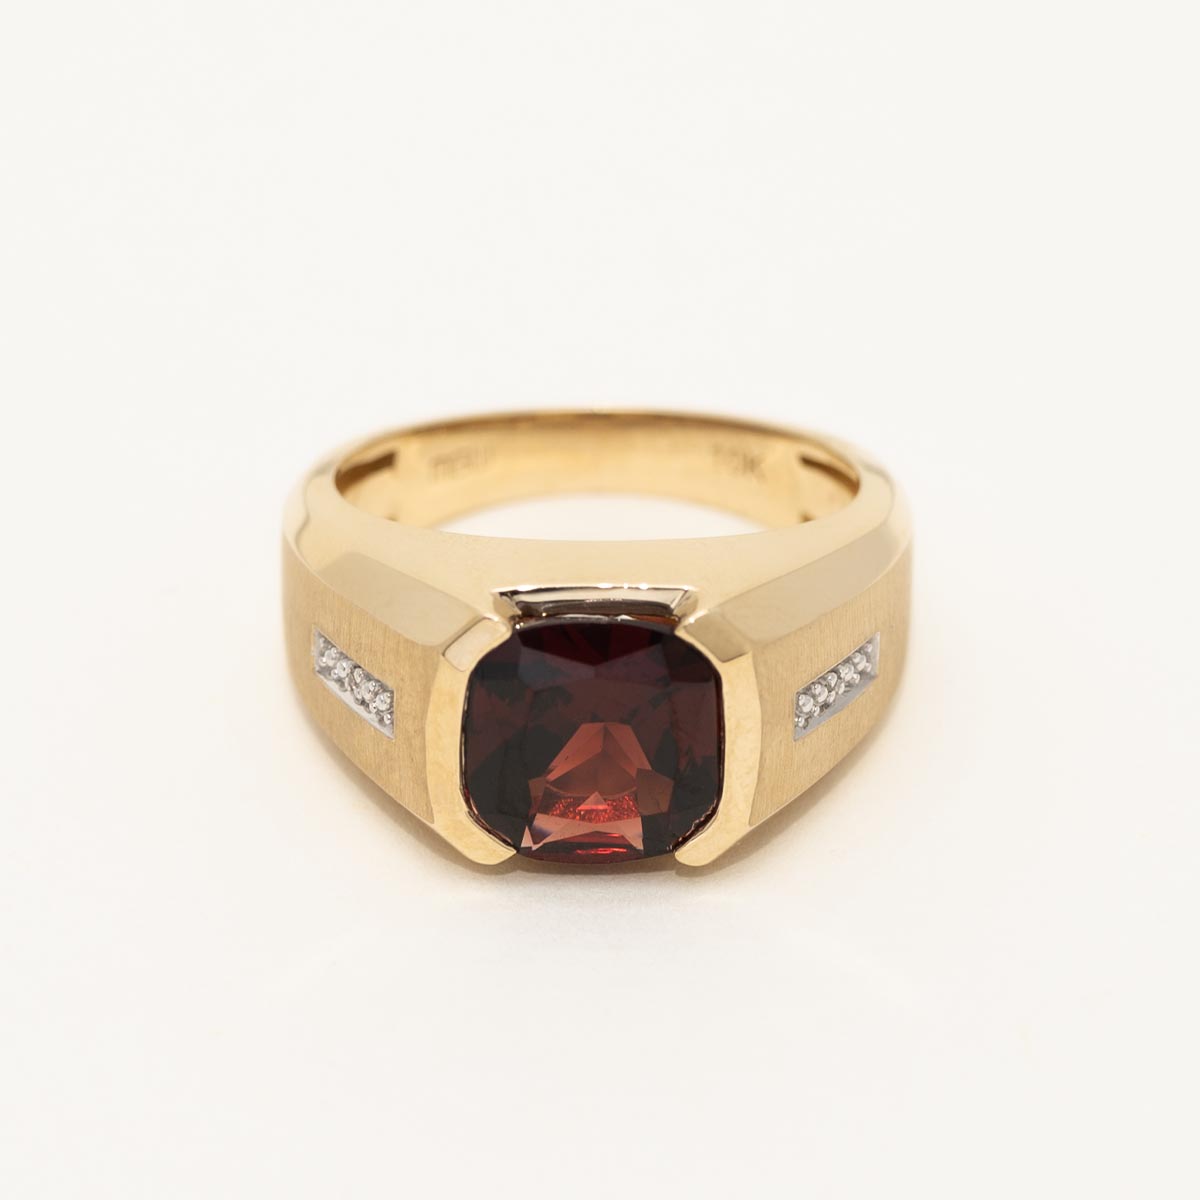 Mens Cushion Cut Garnet Ring in 10kt Yellow Gold with Diamonds